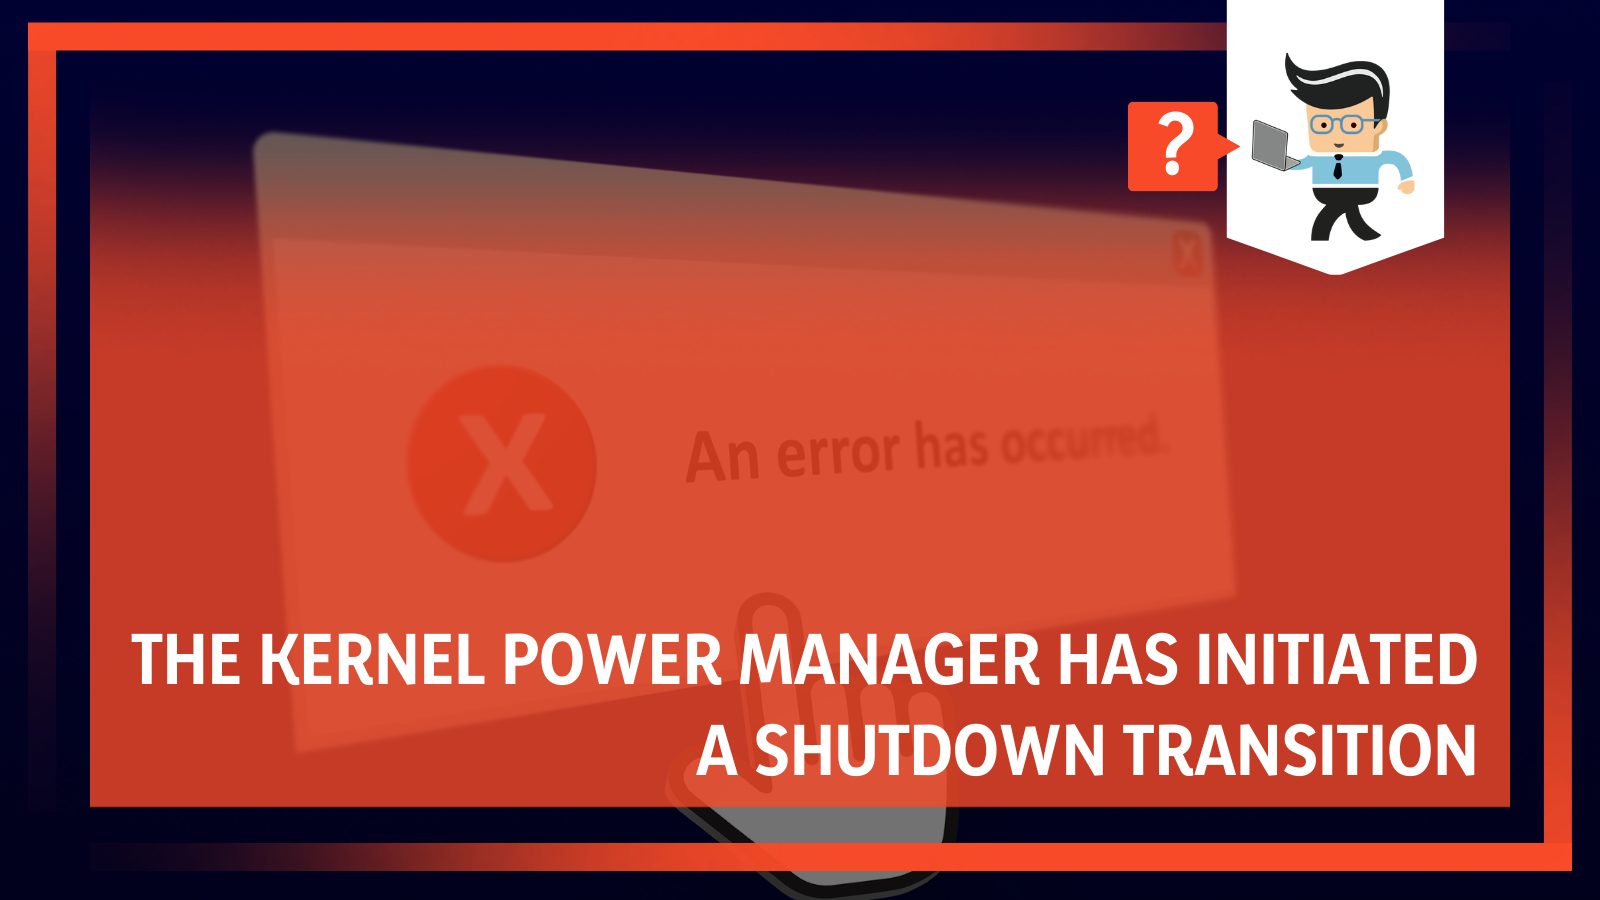 The Kernel Power Manager Has Initiated a Shutdown Transition